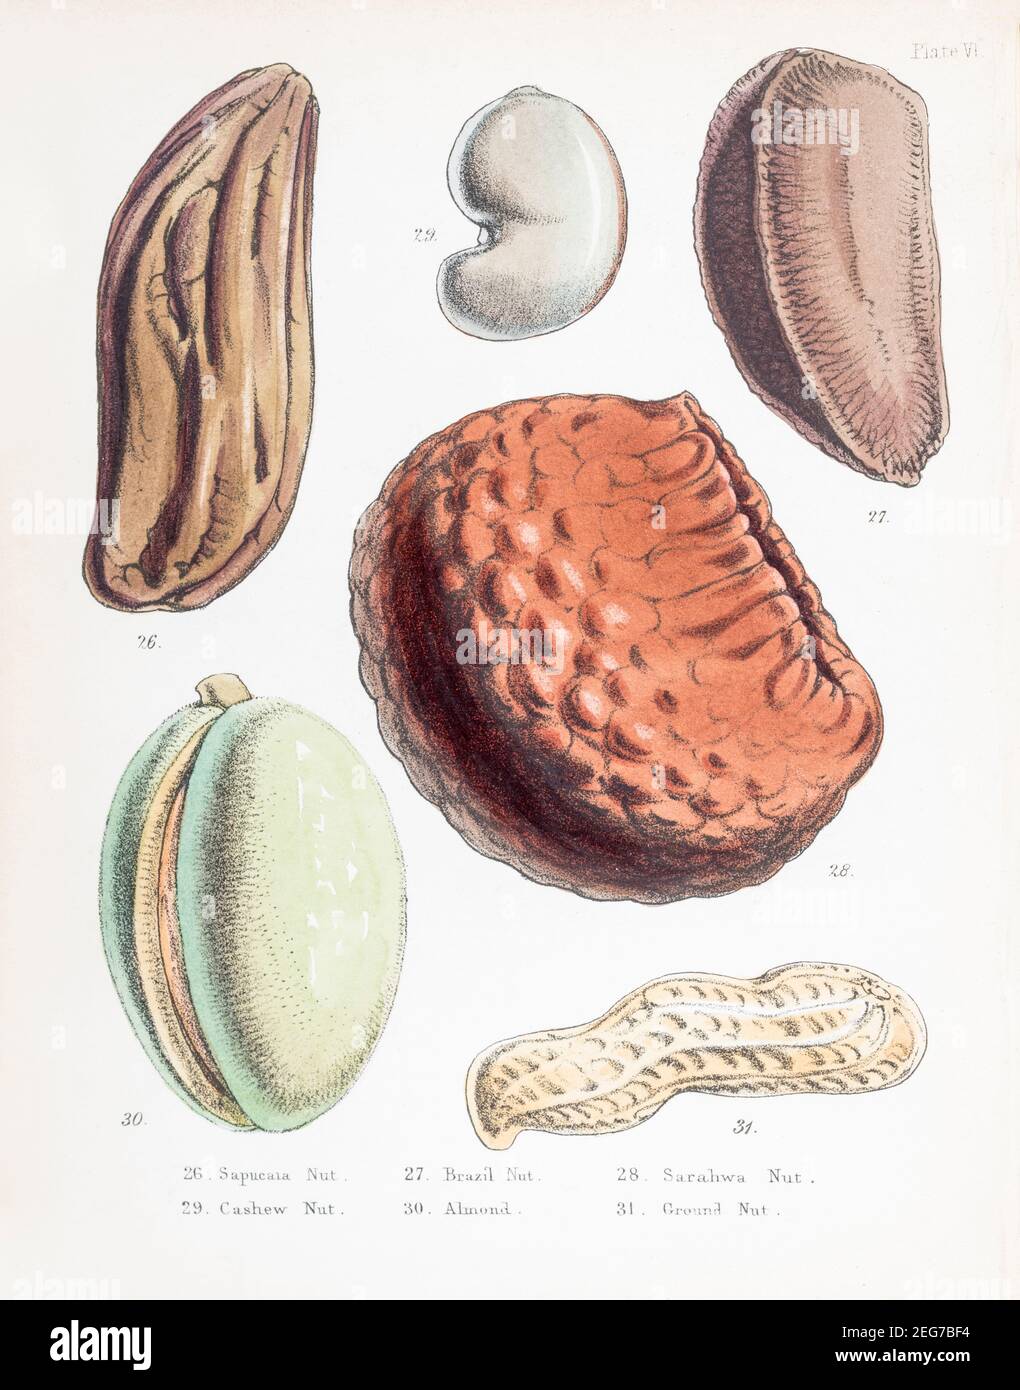 19th c. hand-painted Victorian botanical illustration of Sapucaia, Brazil, Surahwa, Cashew / Anacardium occidentale, Almond and Ground nuts. See notes Stock Photo